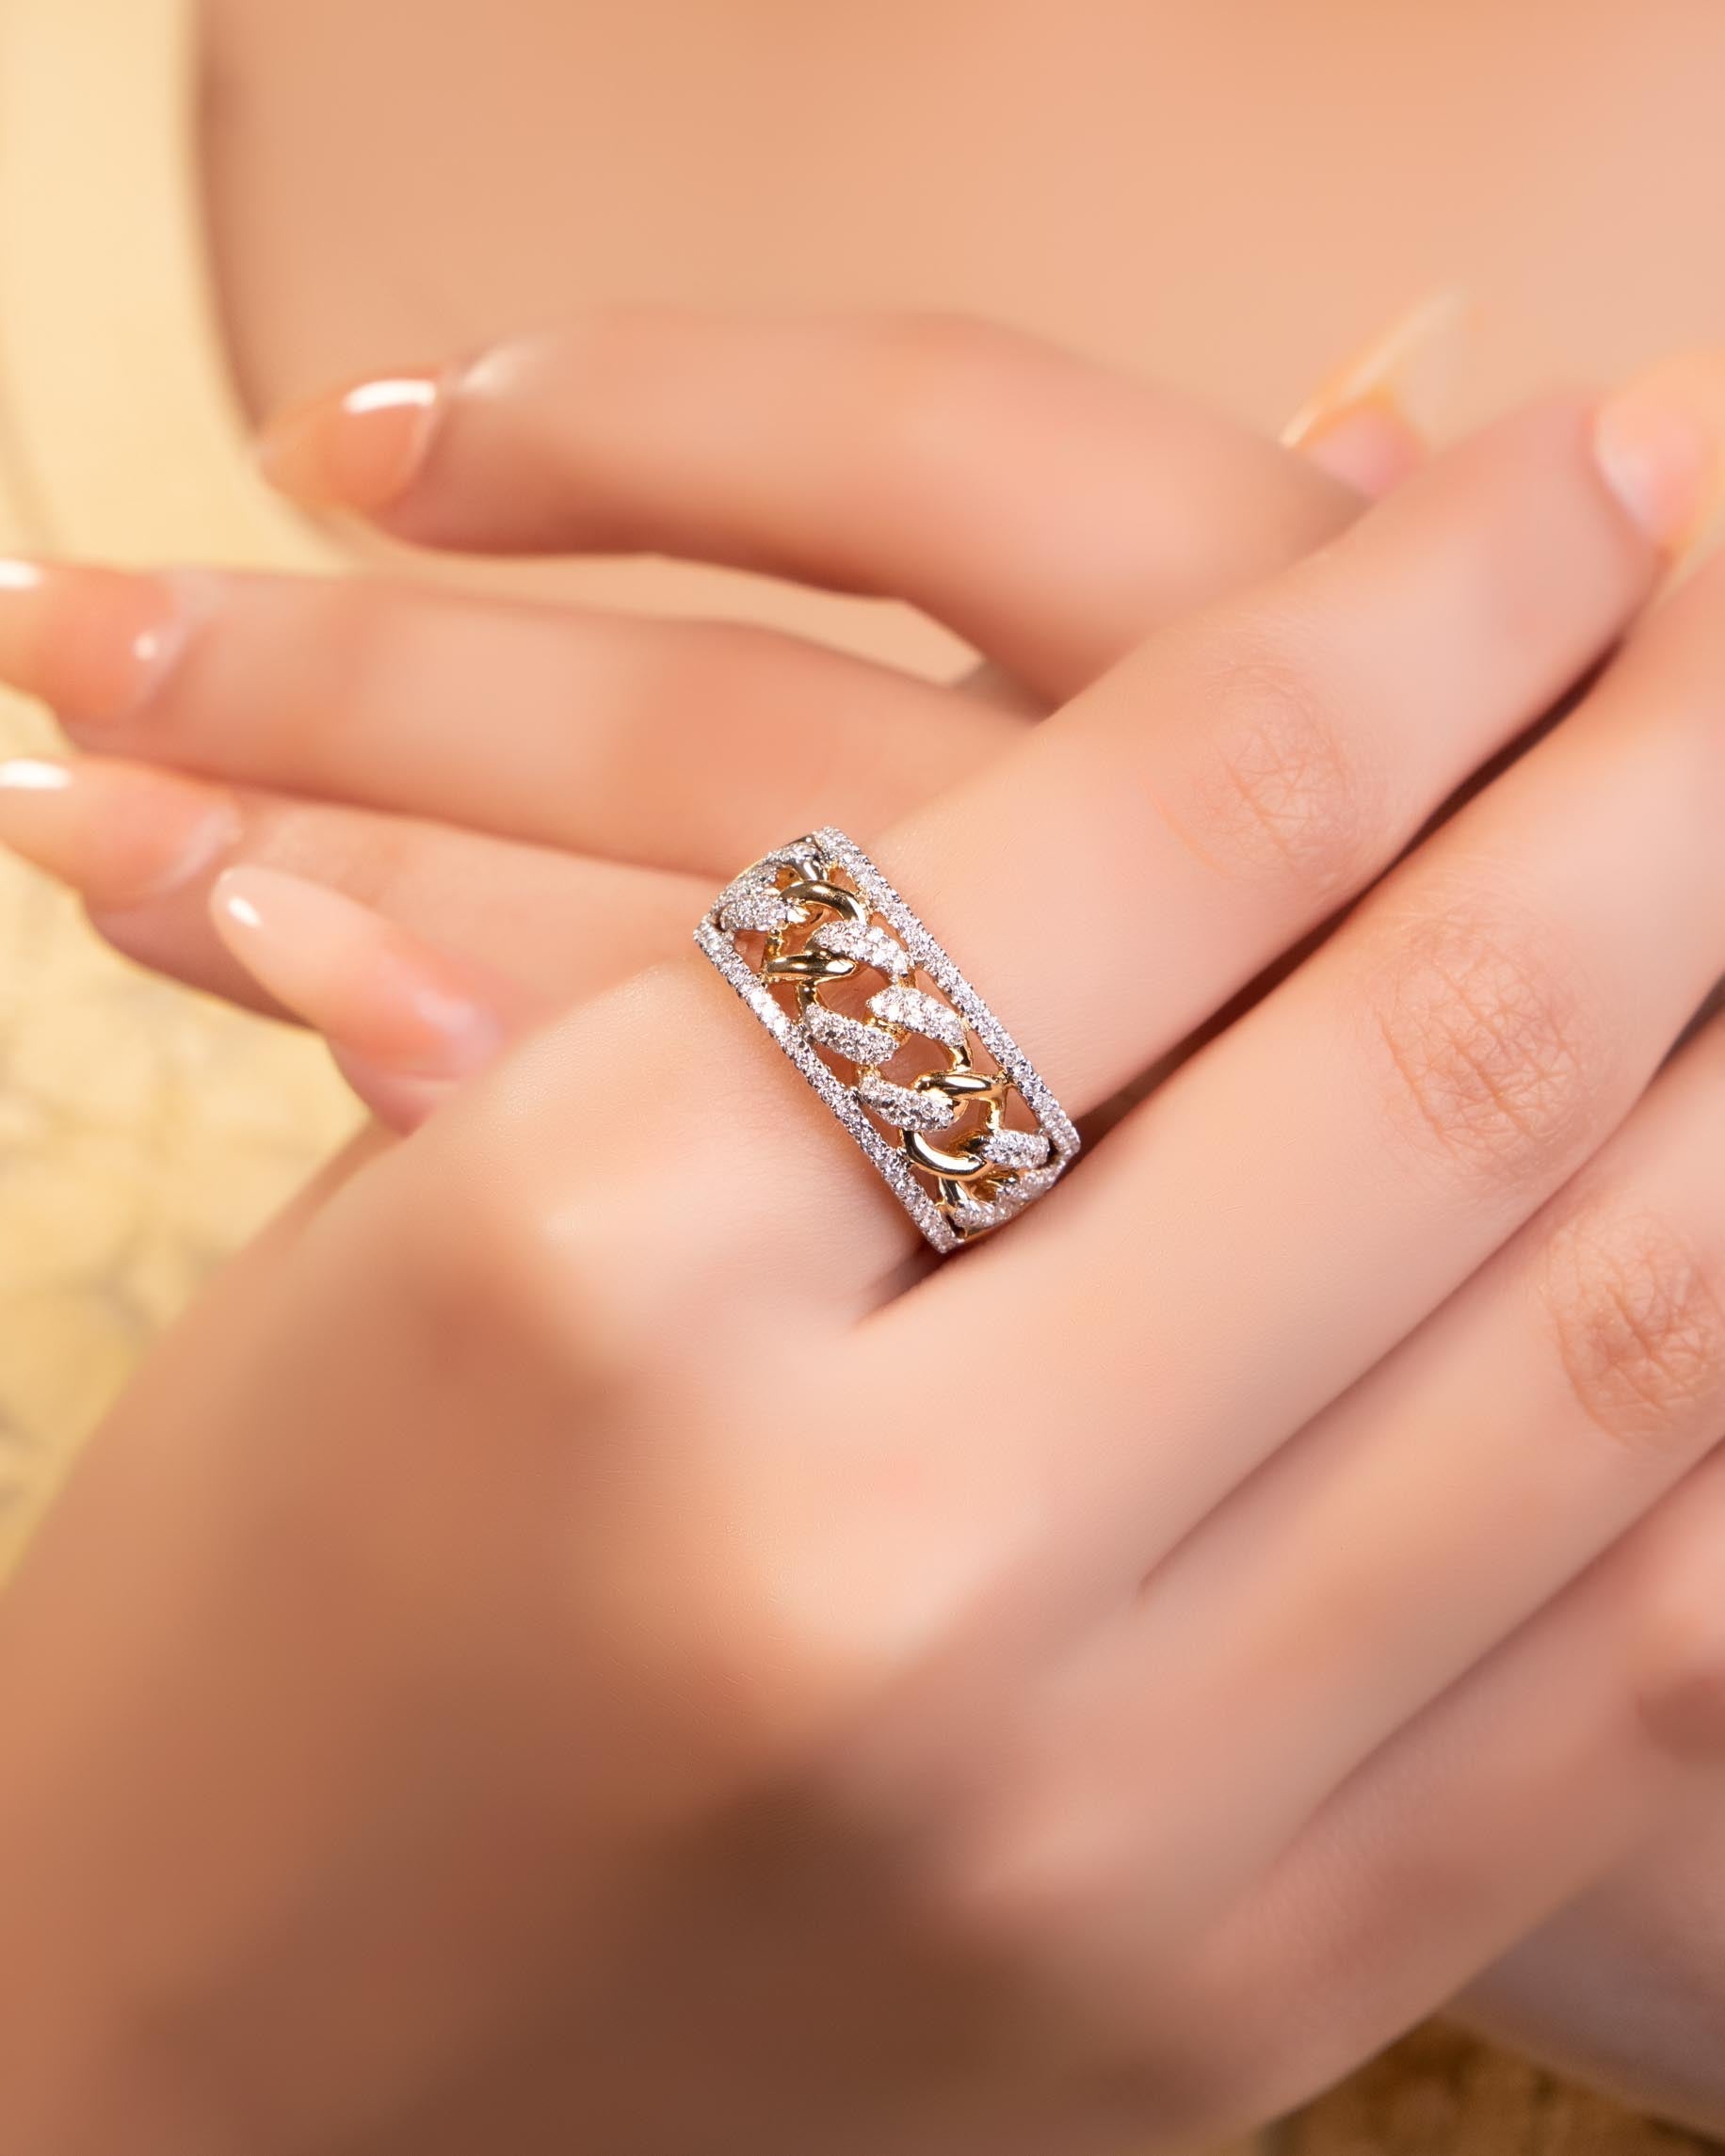 Seamless vs. Traditional: Differences in Engagement Ring Designs